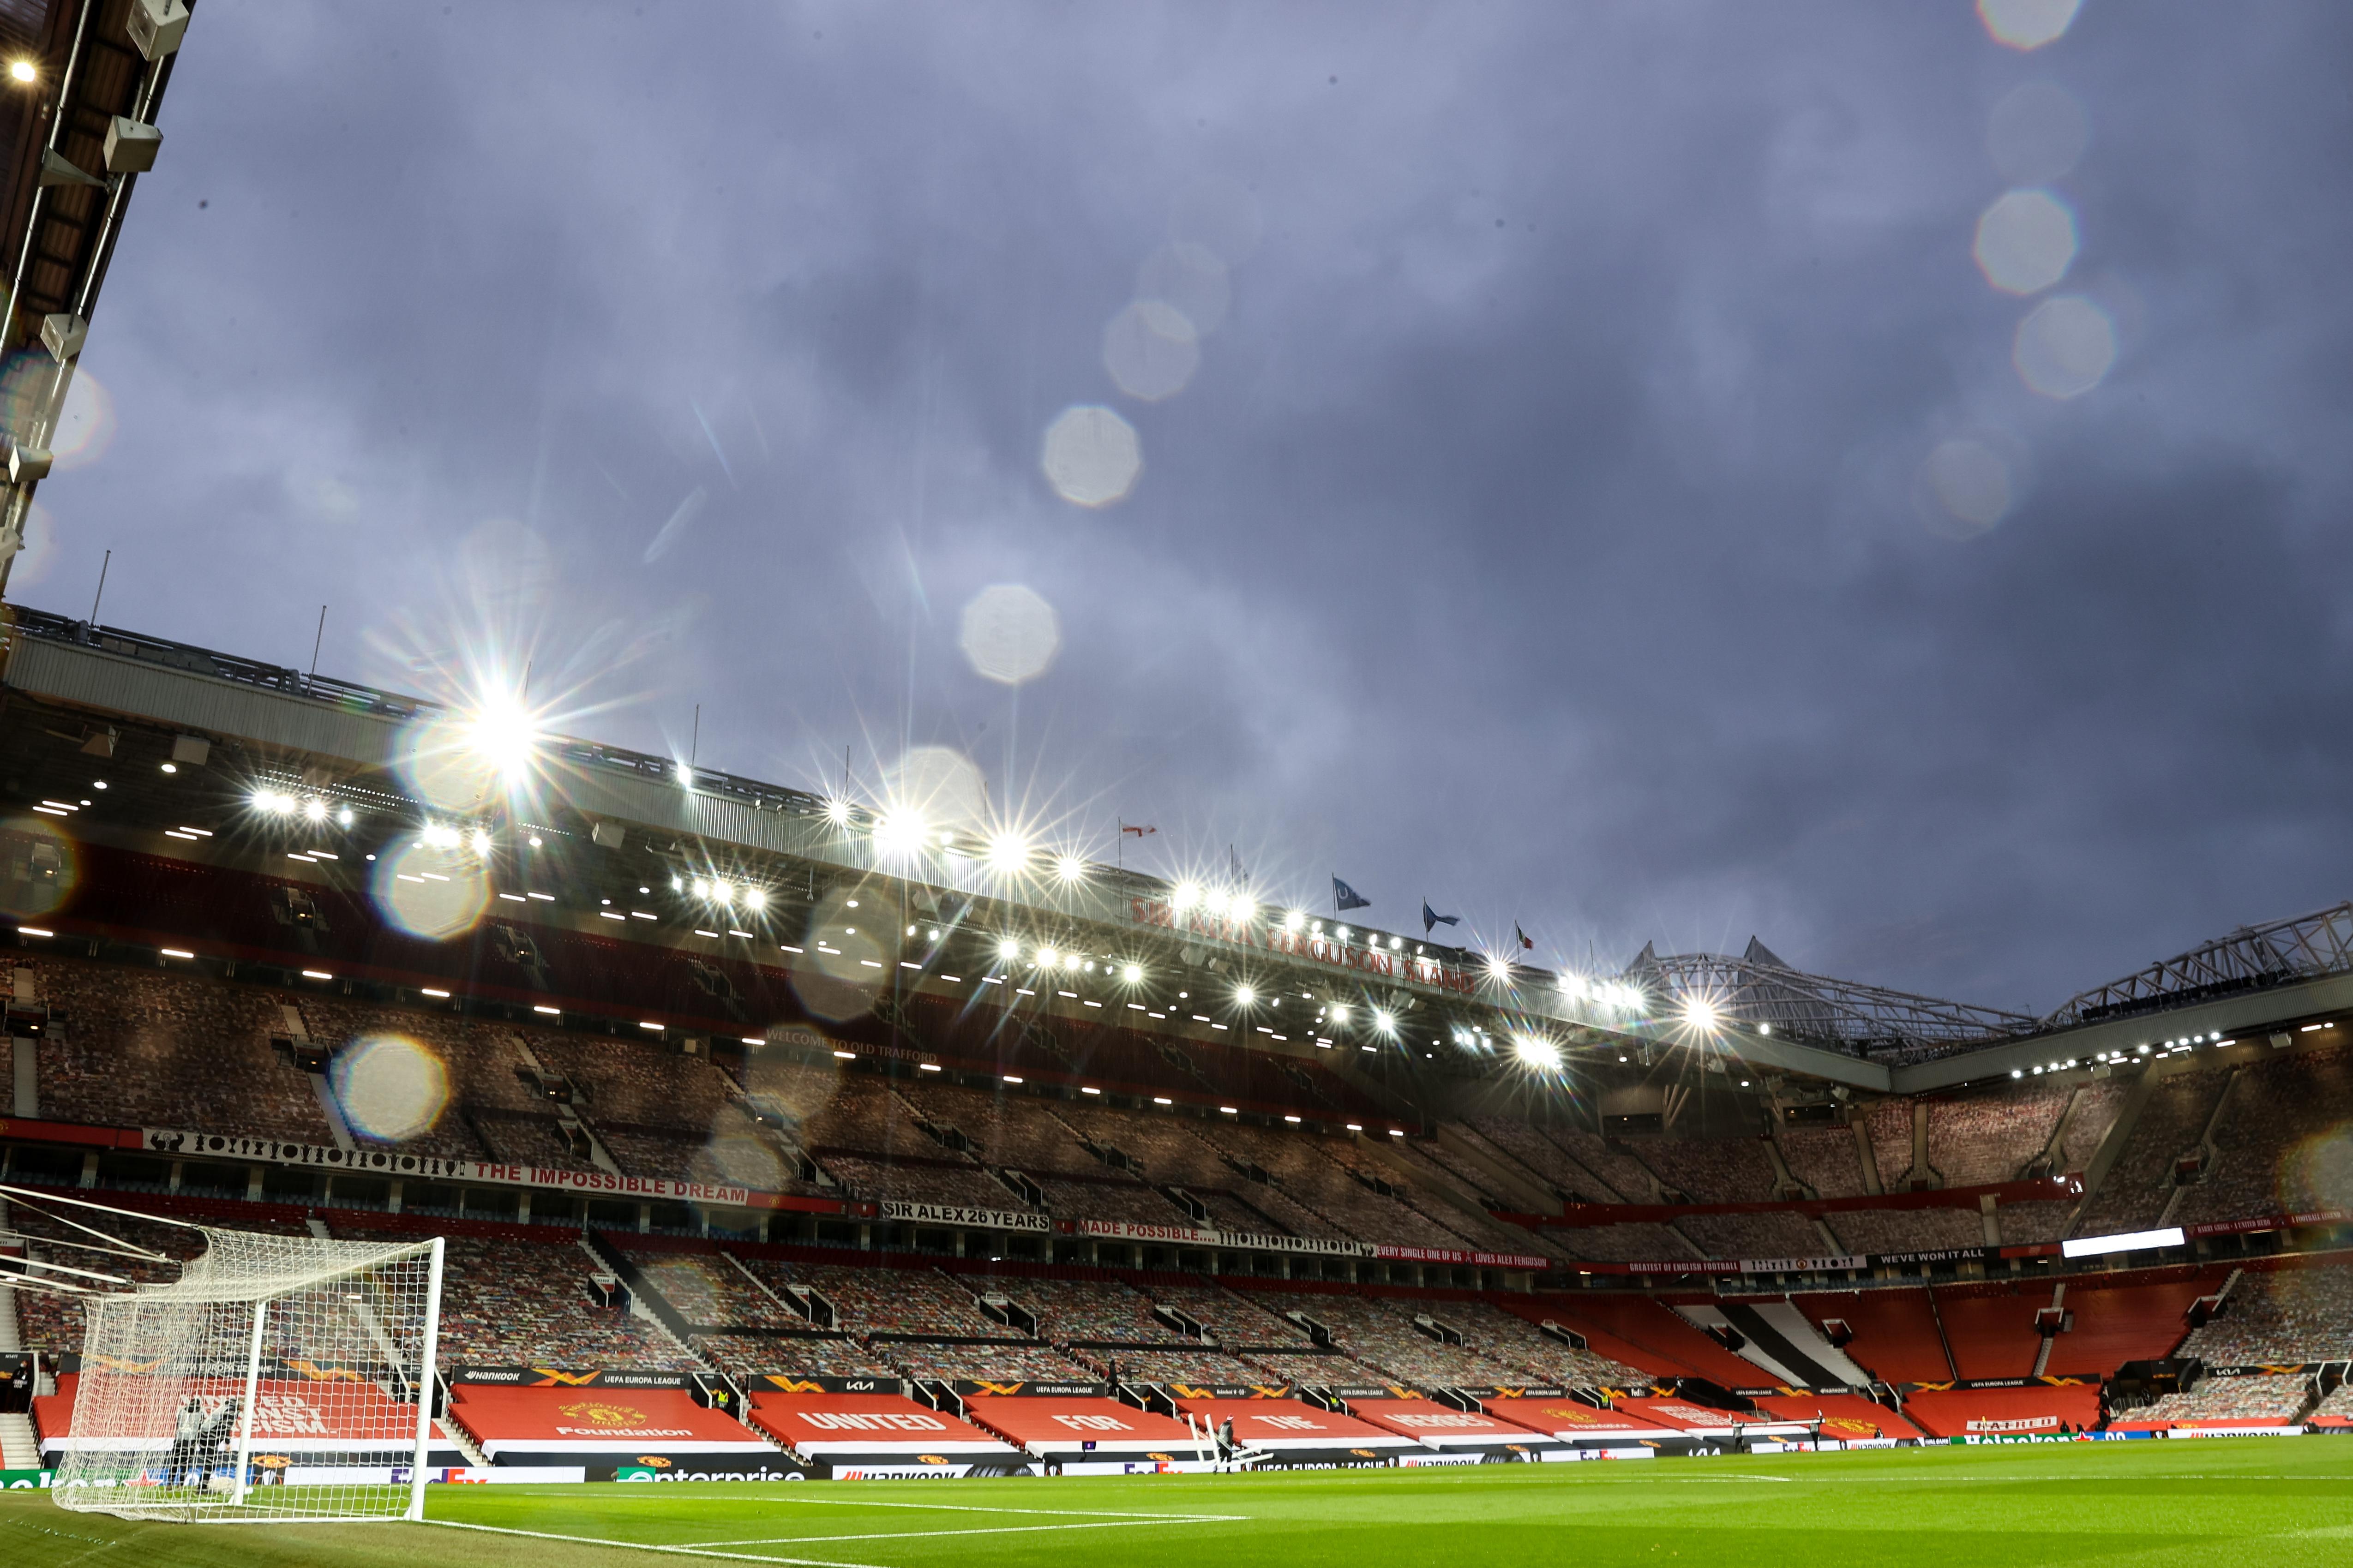 Man Utd Ze Season Ticket Prices For Tenth Year In Row And Plan